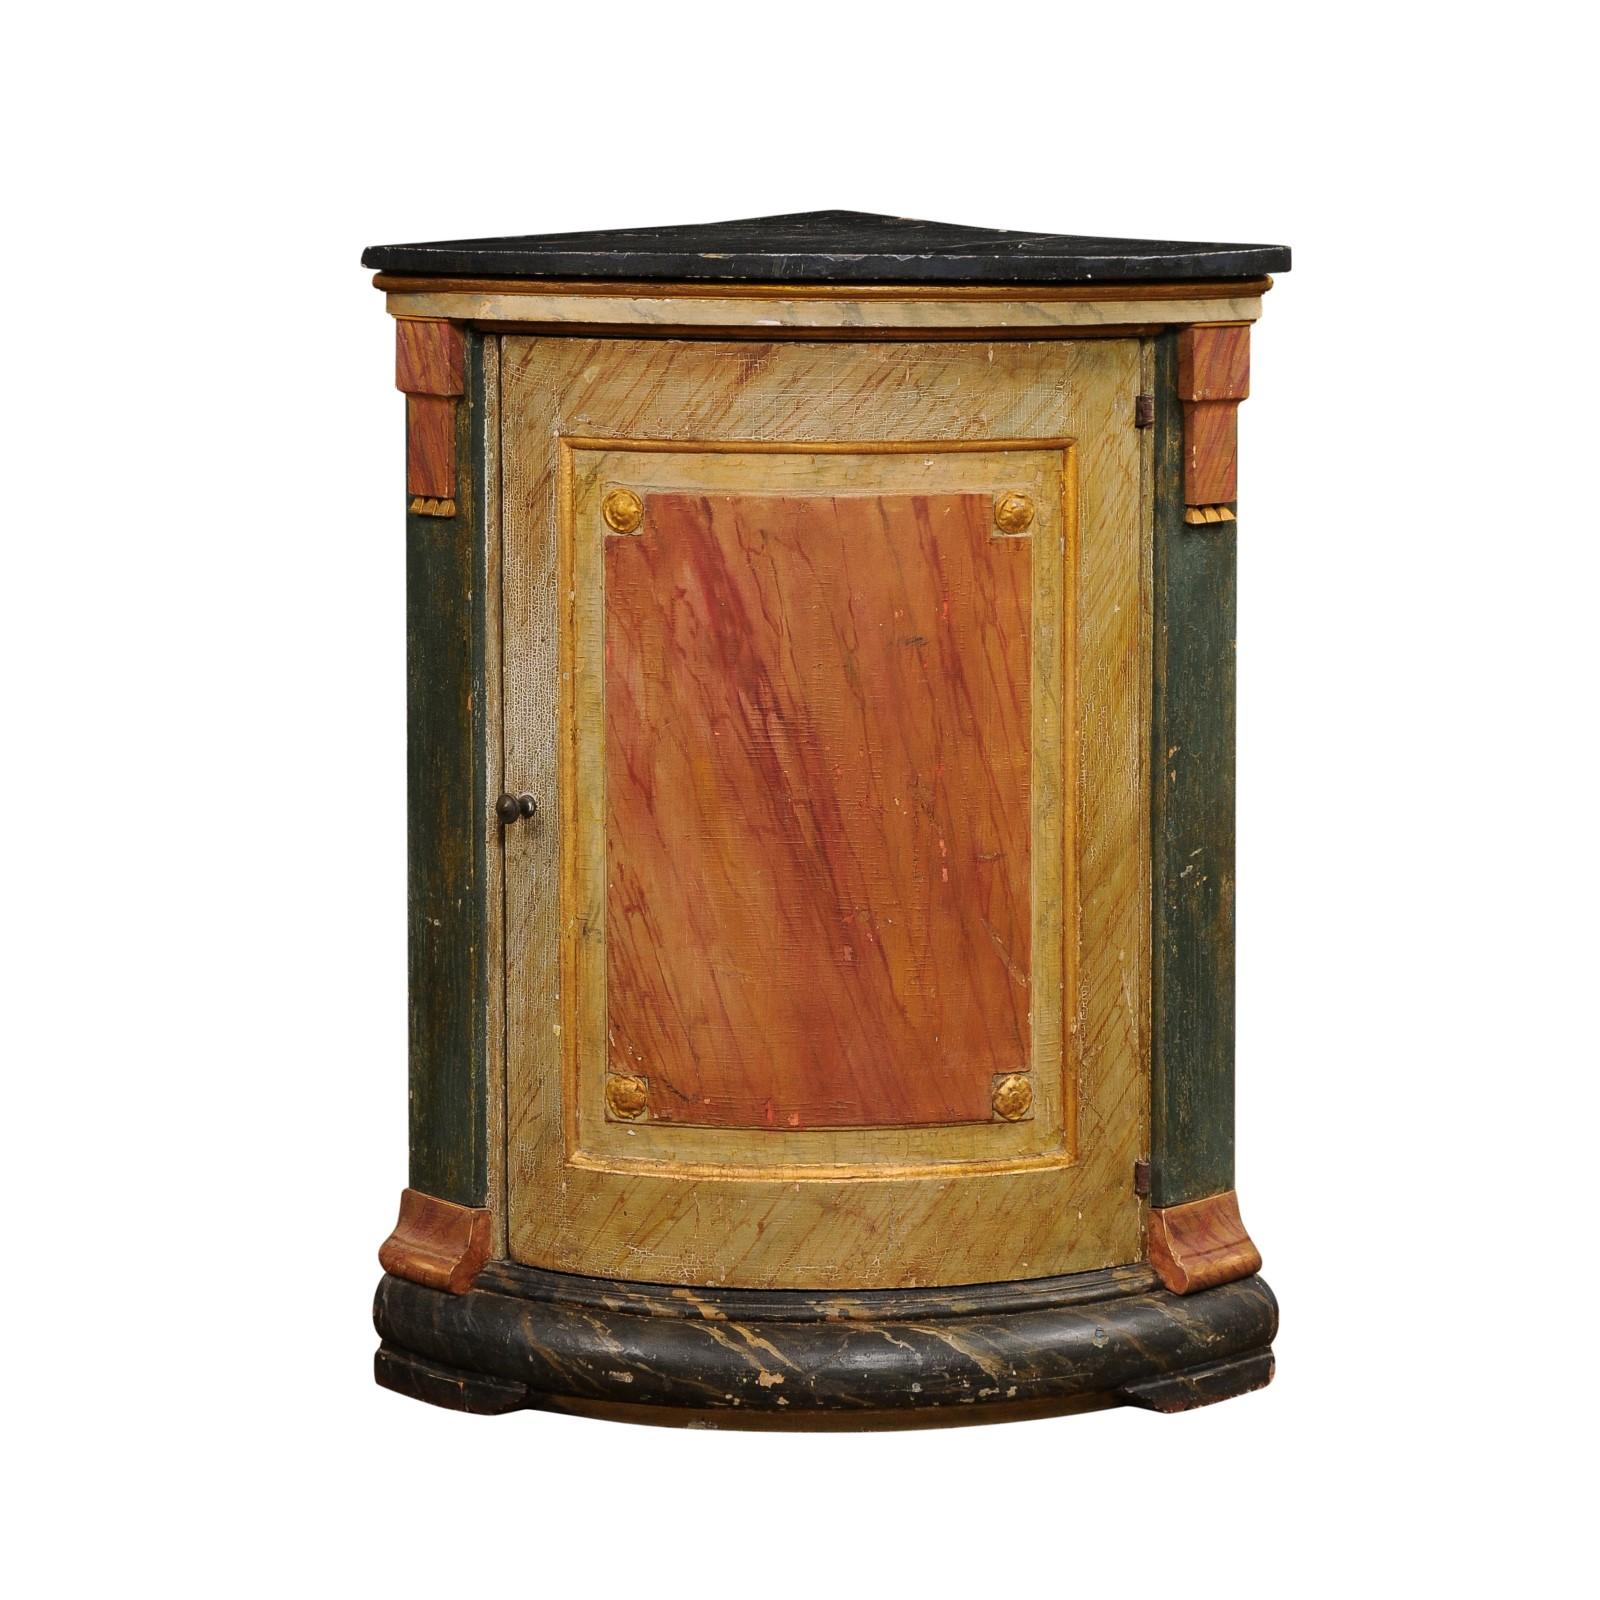 An Italian neoclassical style painted wood corner cabinet from the 19th century, with marbleized polychrome décor, single door, pilasters, gilded rosettes and rustic character. Created in Italy during the 19th century, this corner cabinet charms us